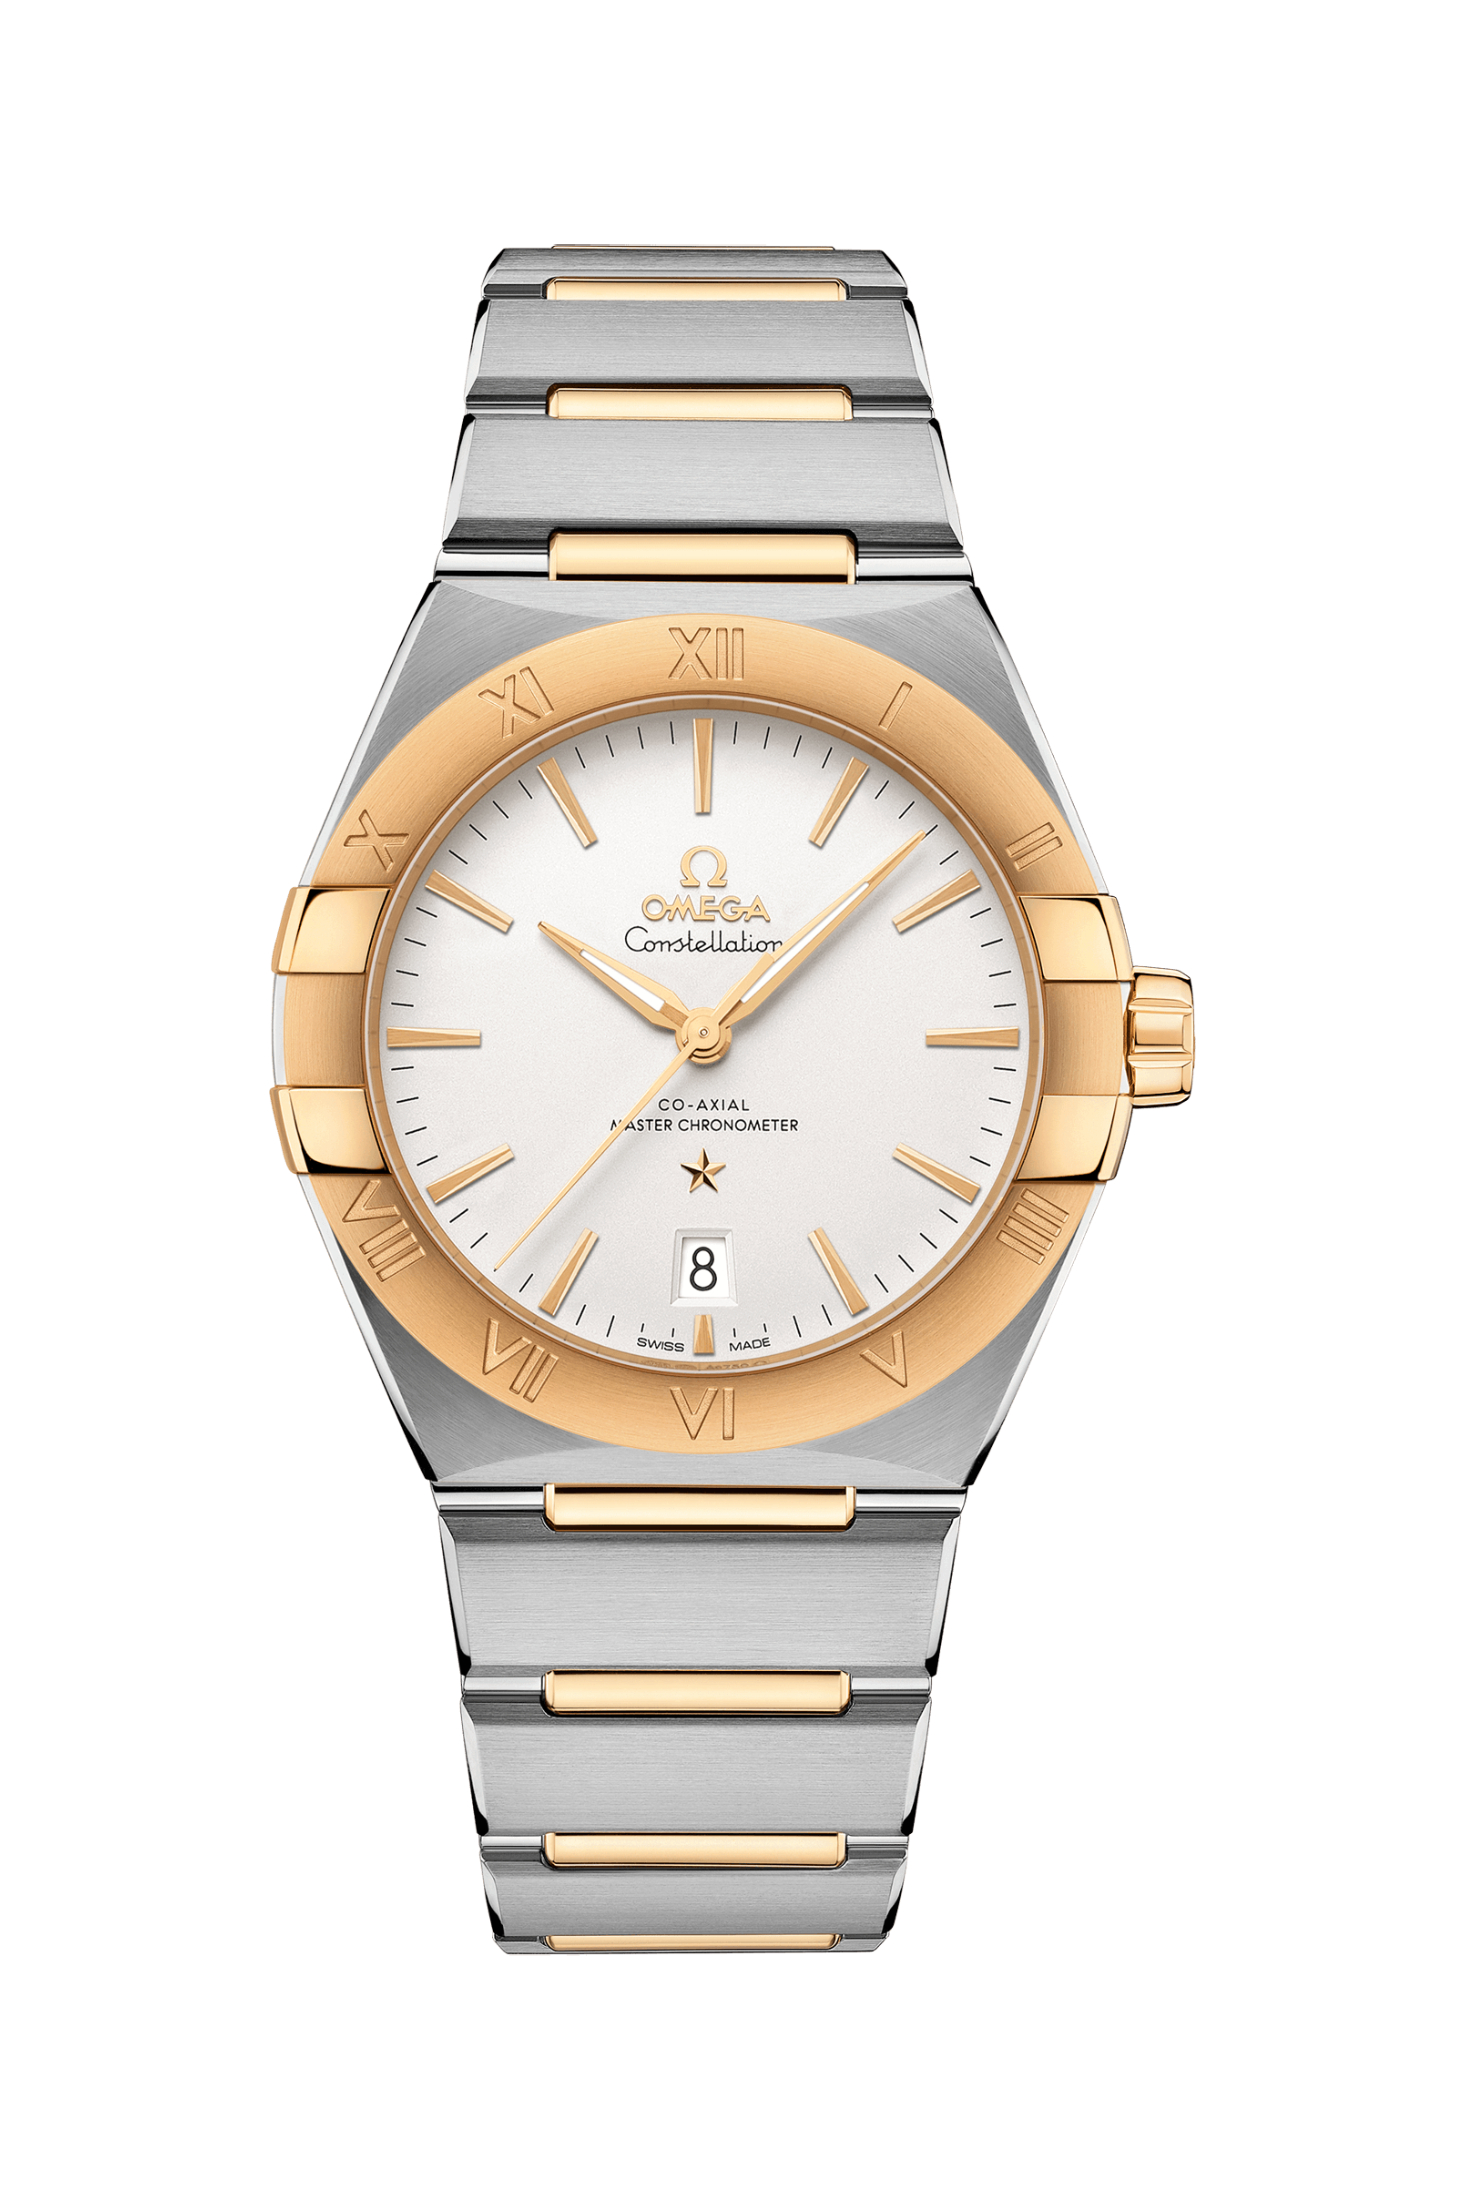 Men's watch / unisex  OMEGA, Constellation Co Axial Master Chronometer / 39mm, SKU: 131.20.39.20.02.002 | watchapproach.com